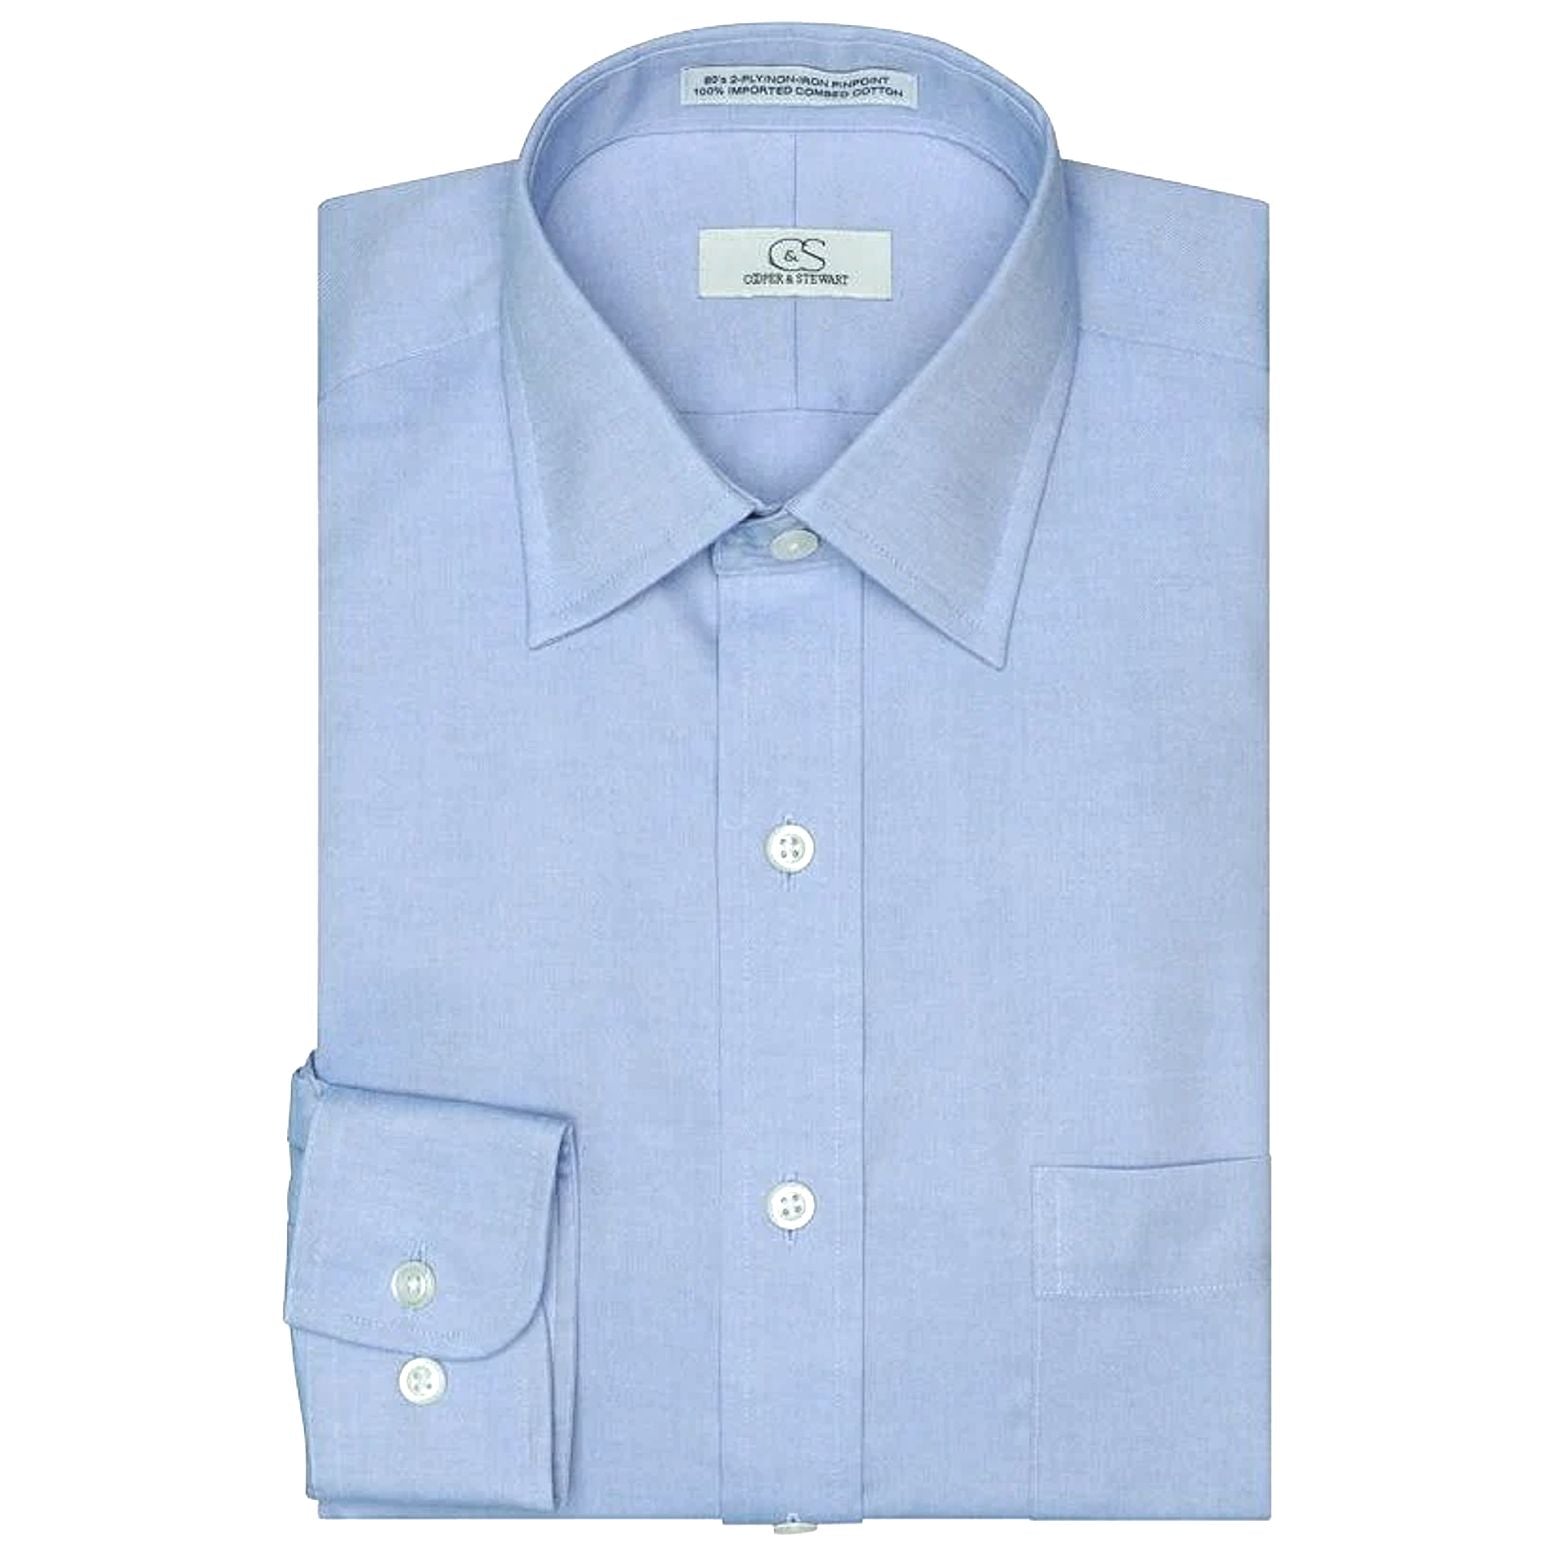 The Classic Blue Wrinkle-Free Cotton Shirt by - Oxford Pinpoint Dress